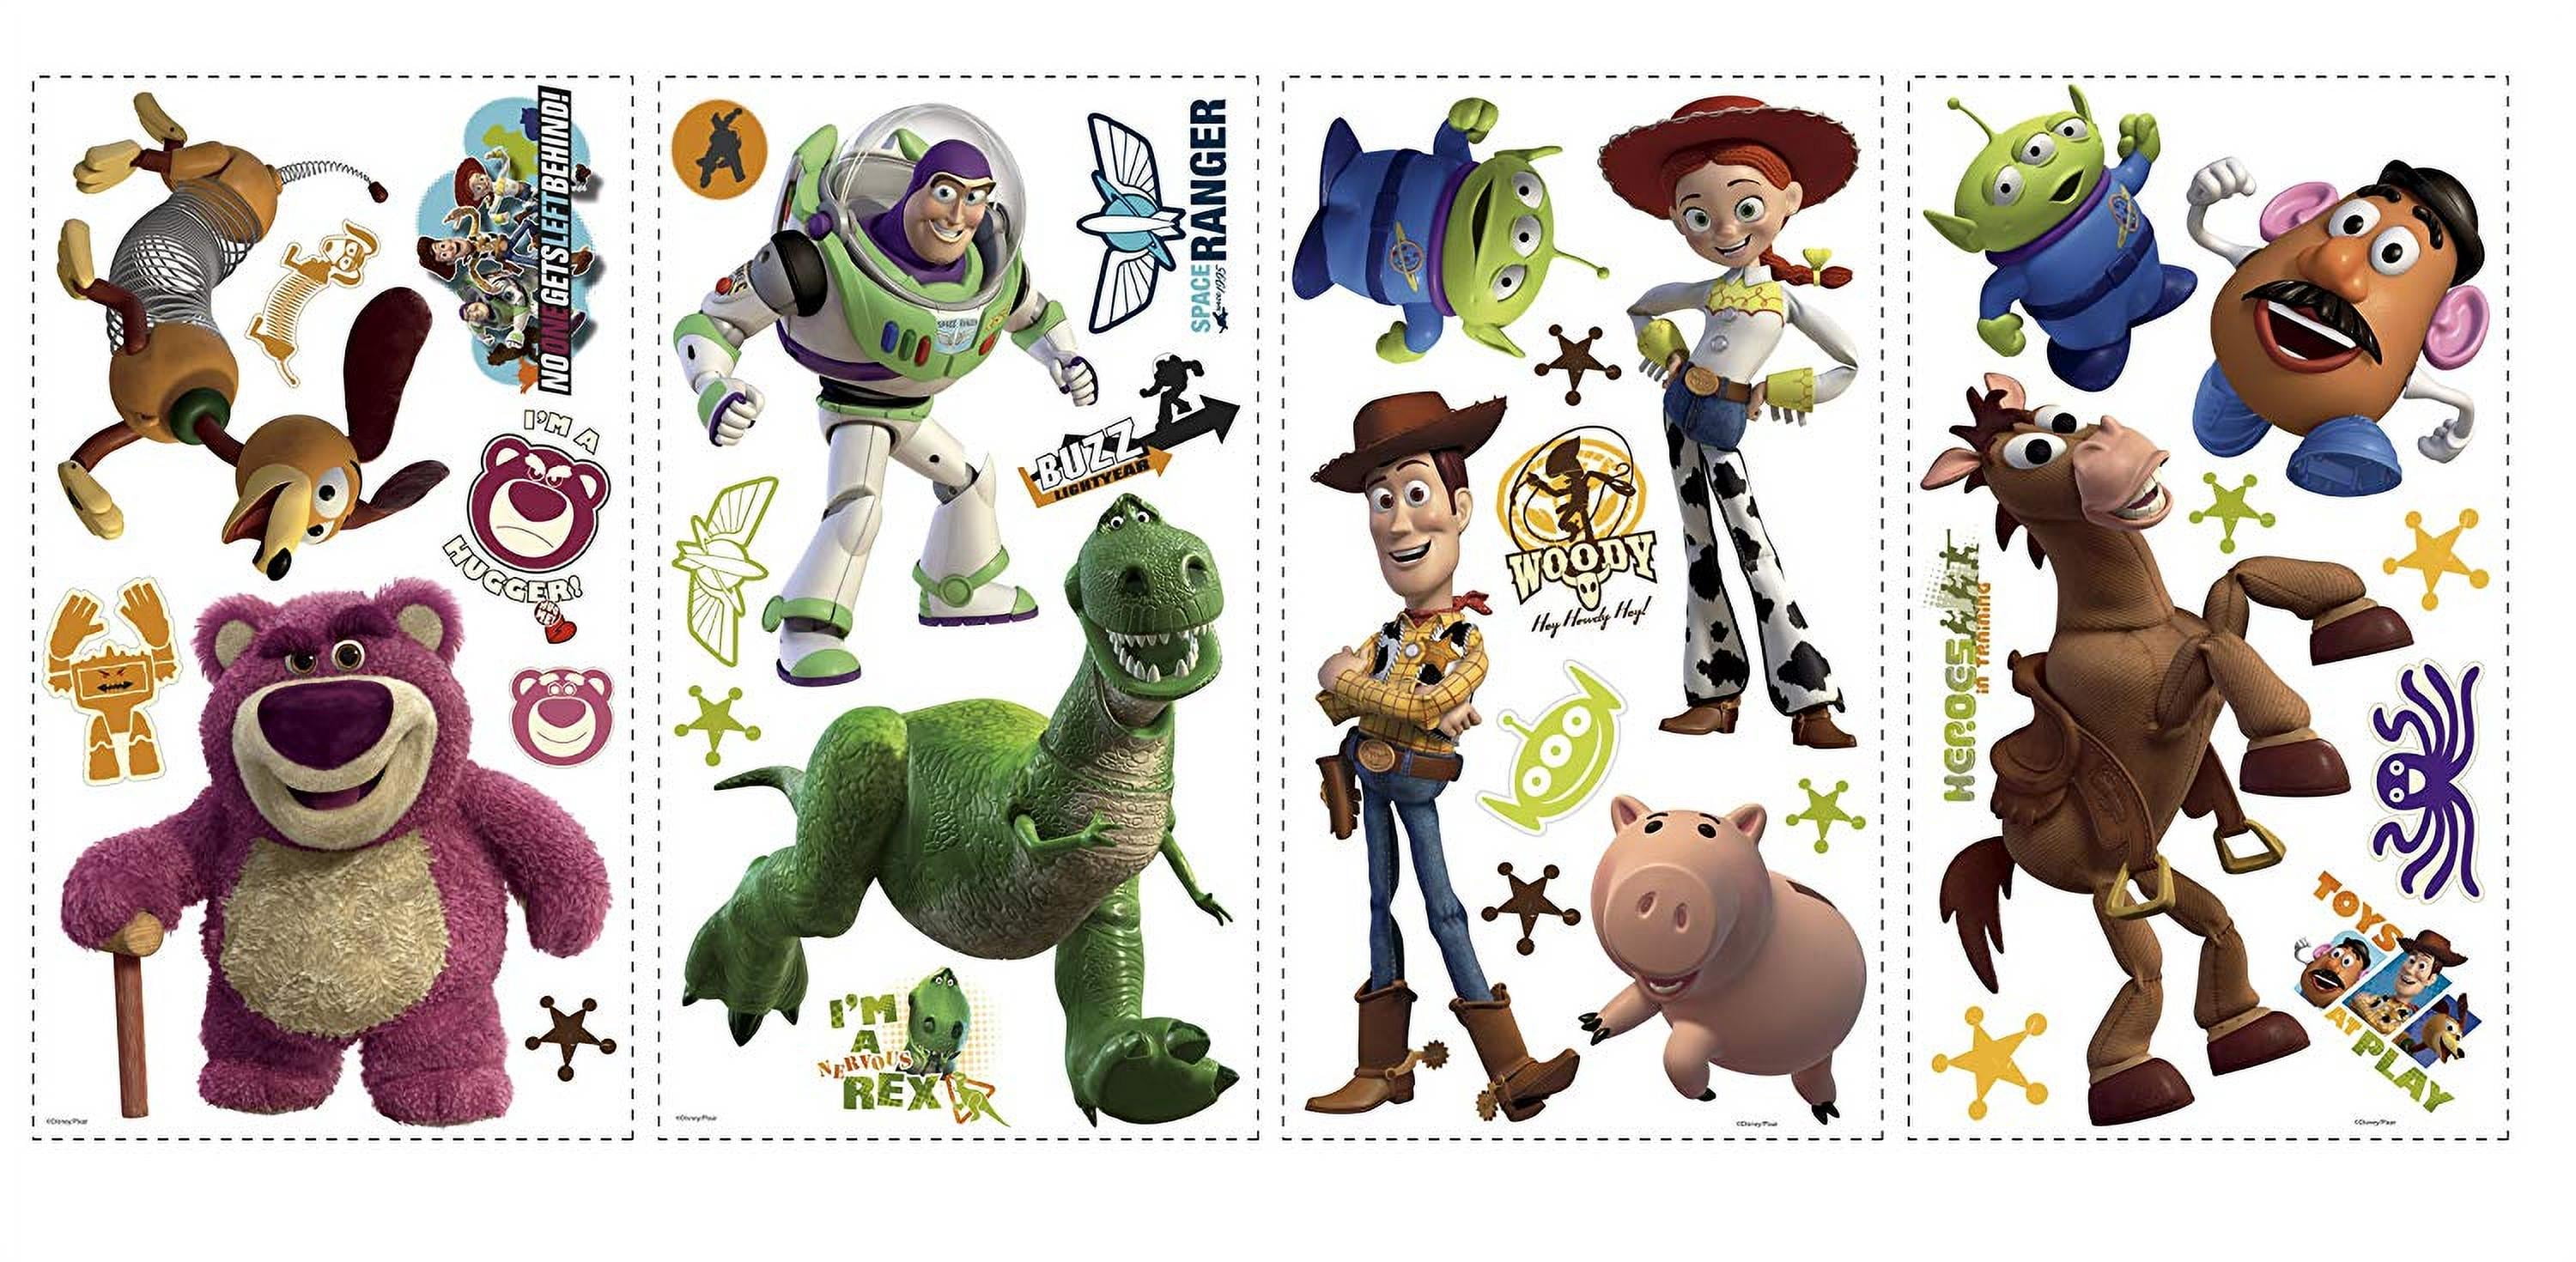 Little Green Men Toy story canvas quote wall decal photo painting pop art poster 